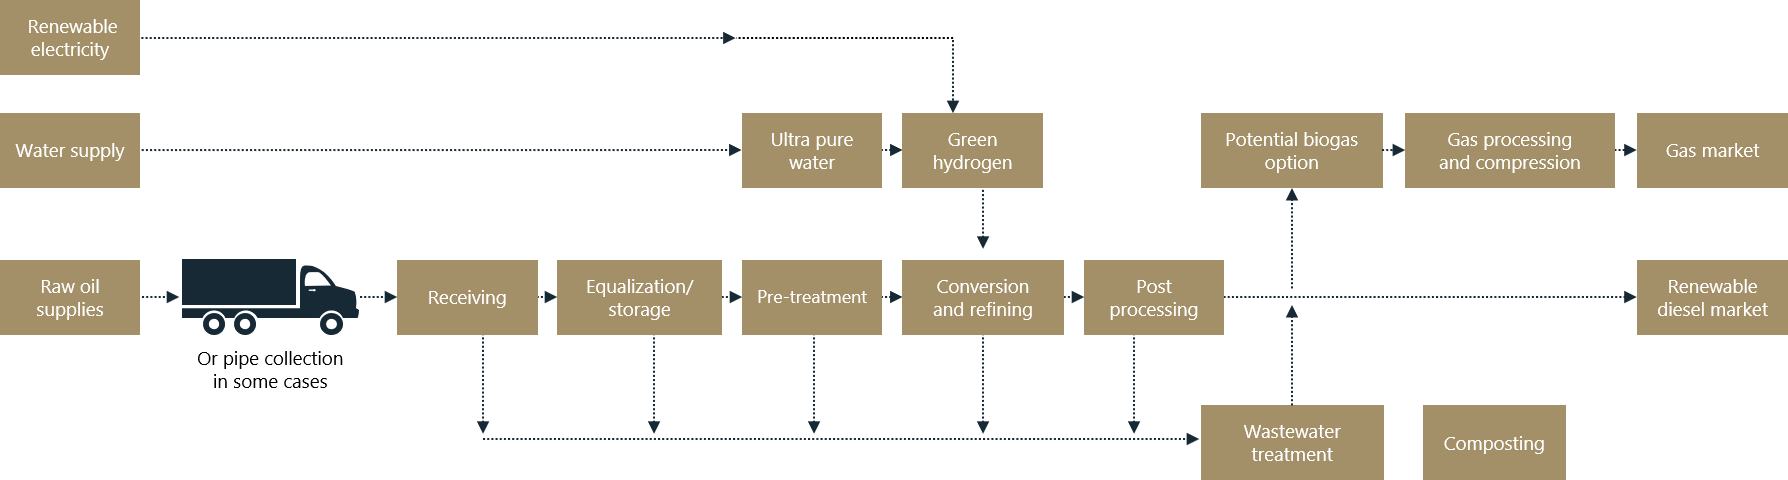 Flowchart showing a renewable diesel production sequence for wastewater treatment and RNG production.